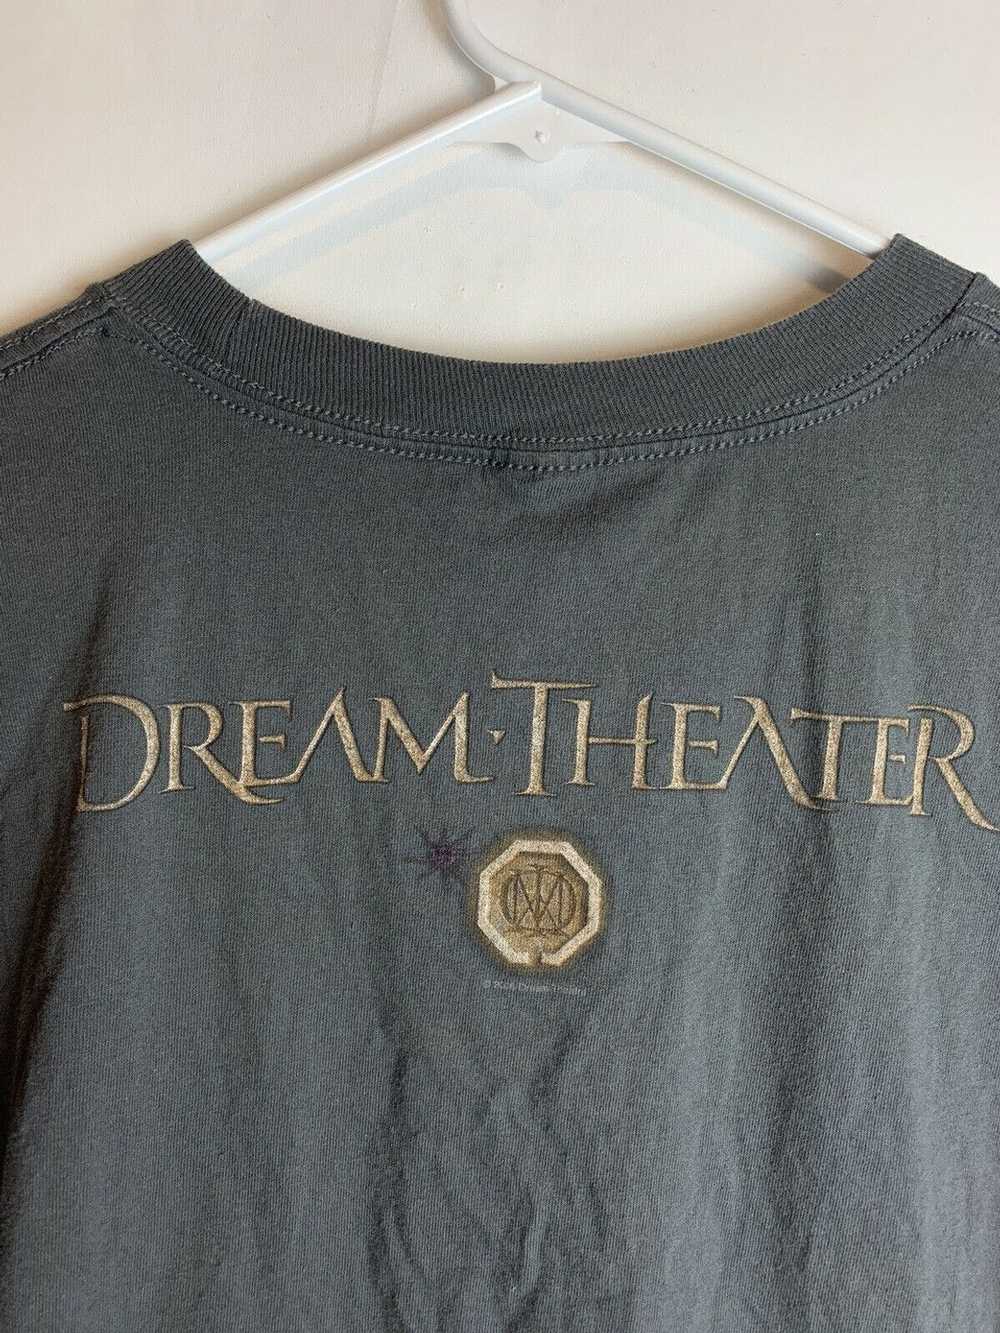 Alstyle Dream Theater 2006 Double Sided Alstyle G… - image 6